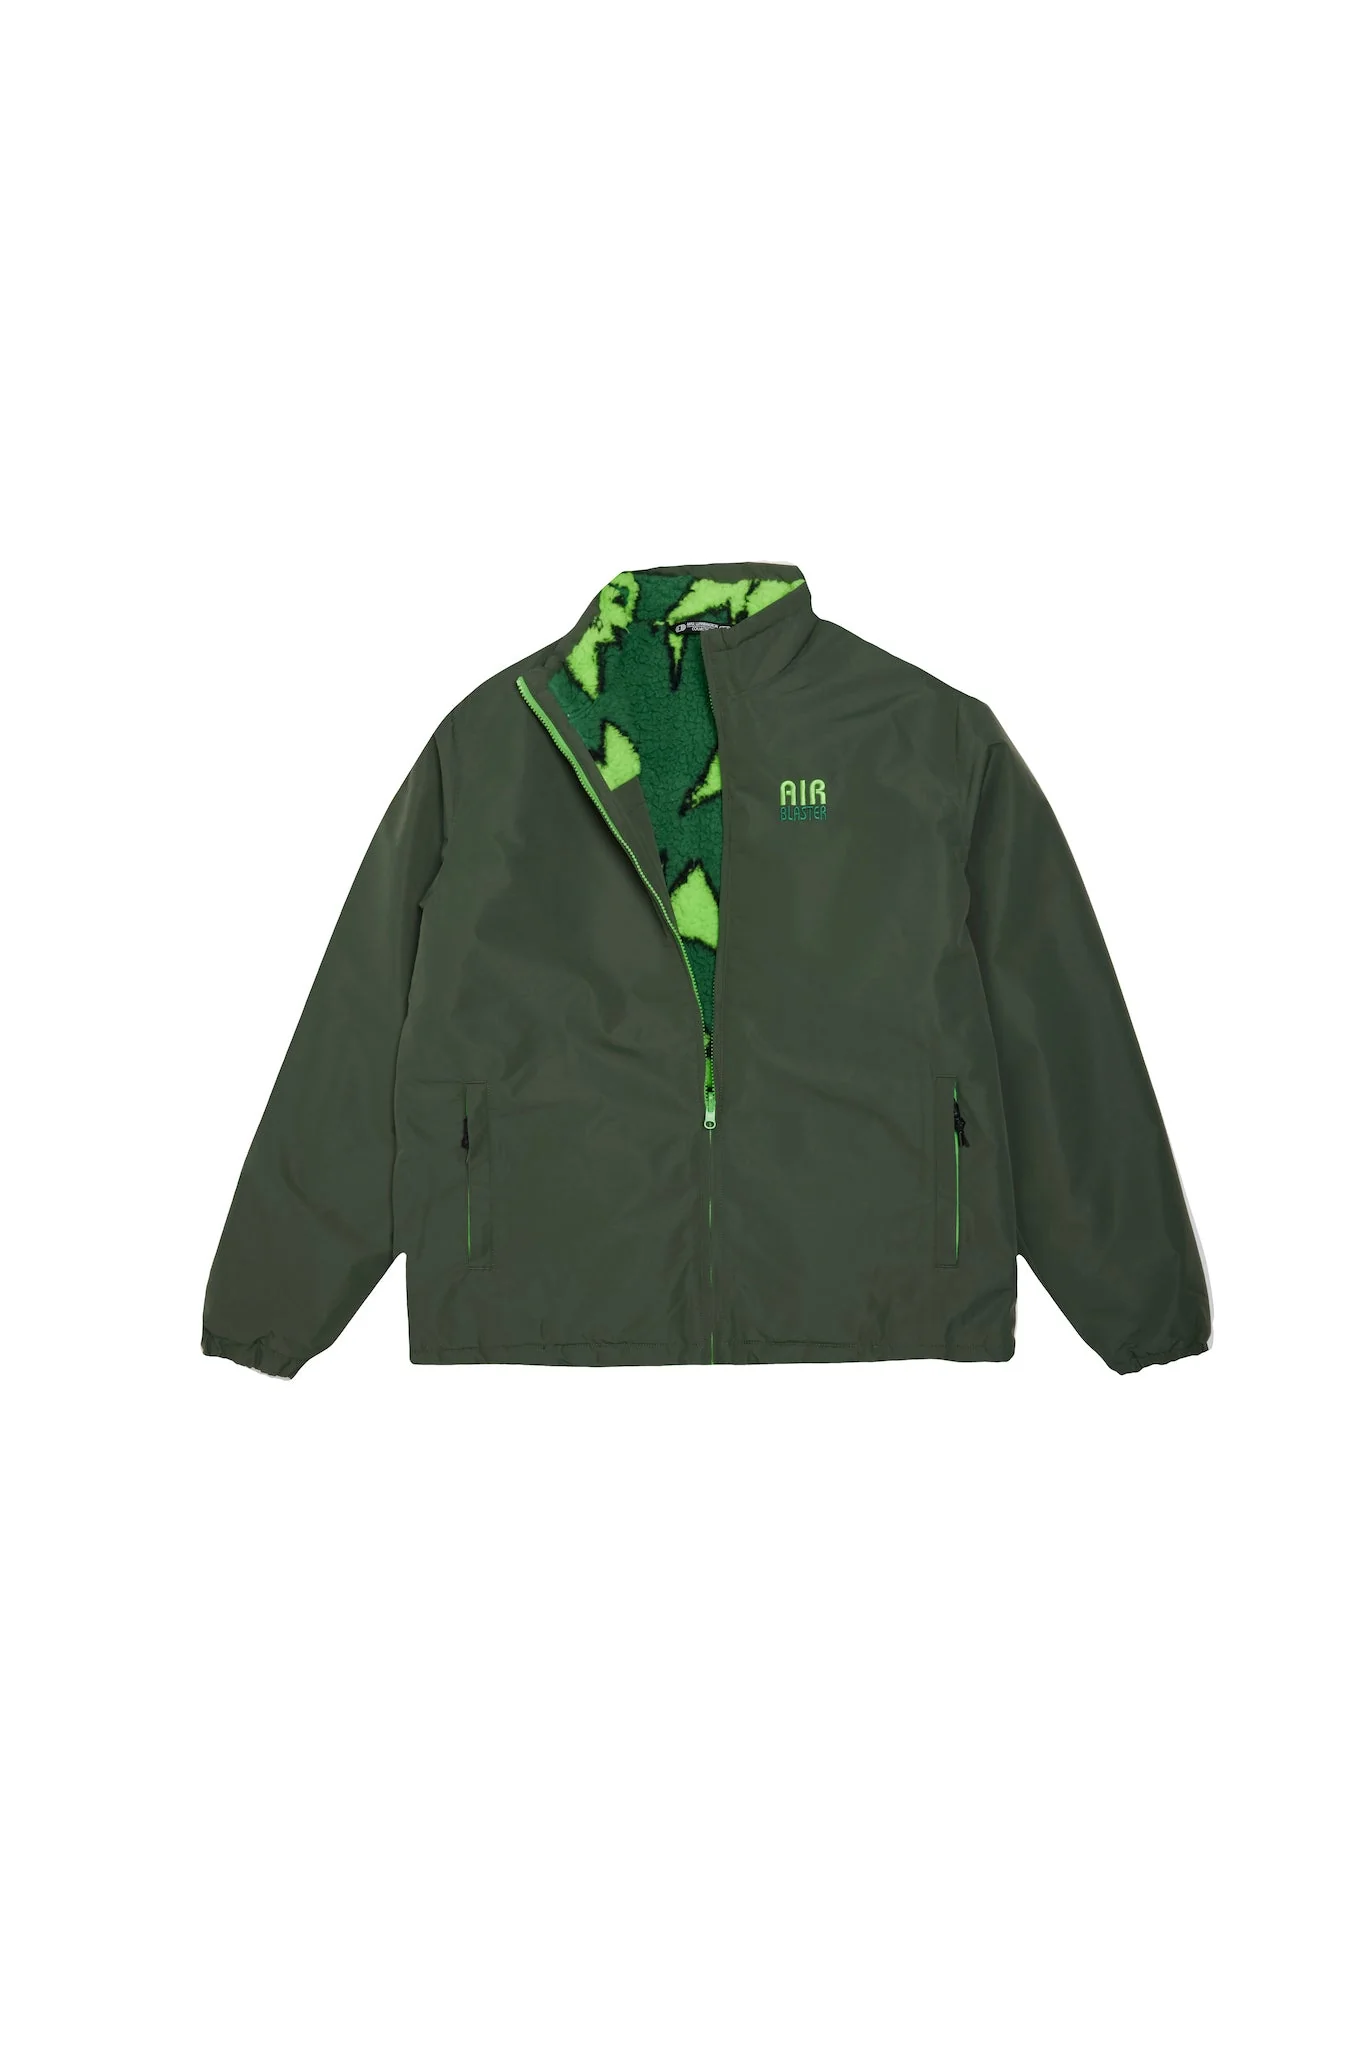 Airblaster Double Puff jacket max big terry